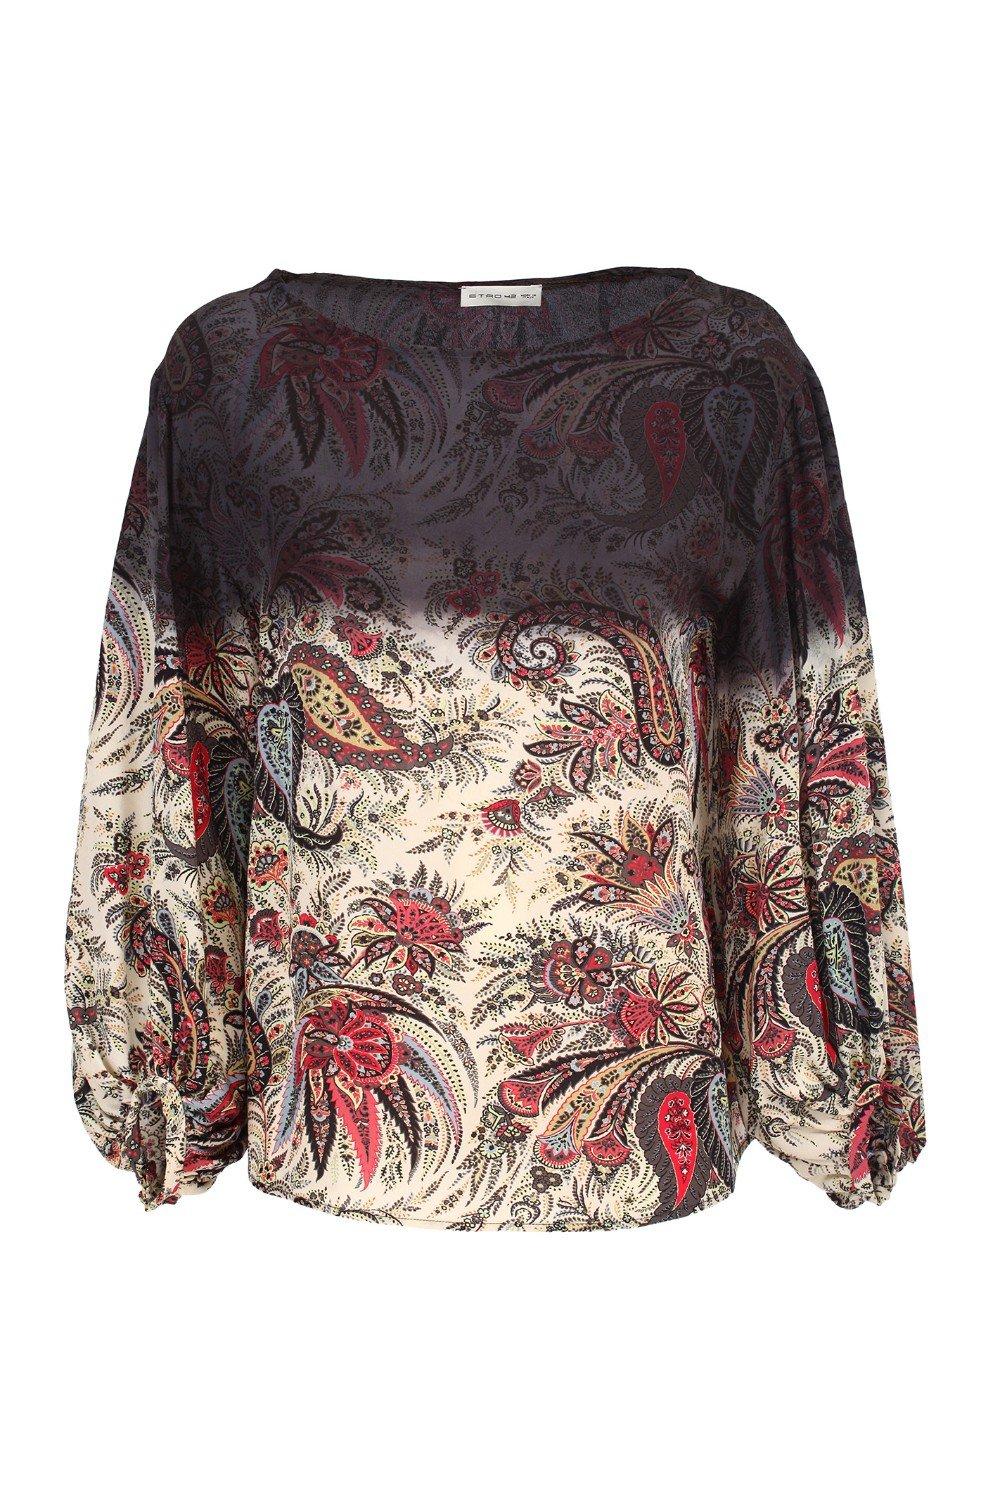 Etro Synthetic Blouse With Degradé Effect Paisley Print - Lyst